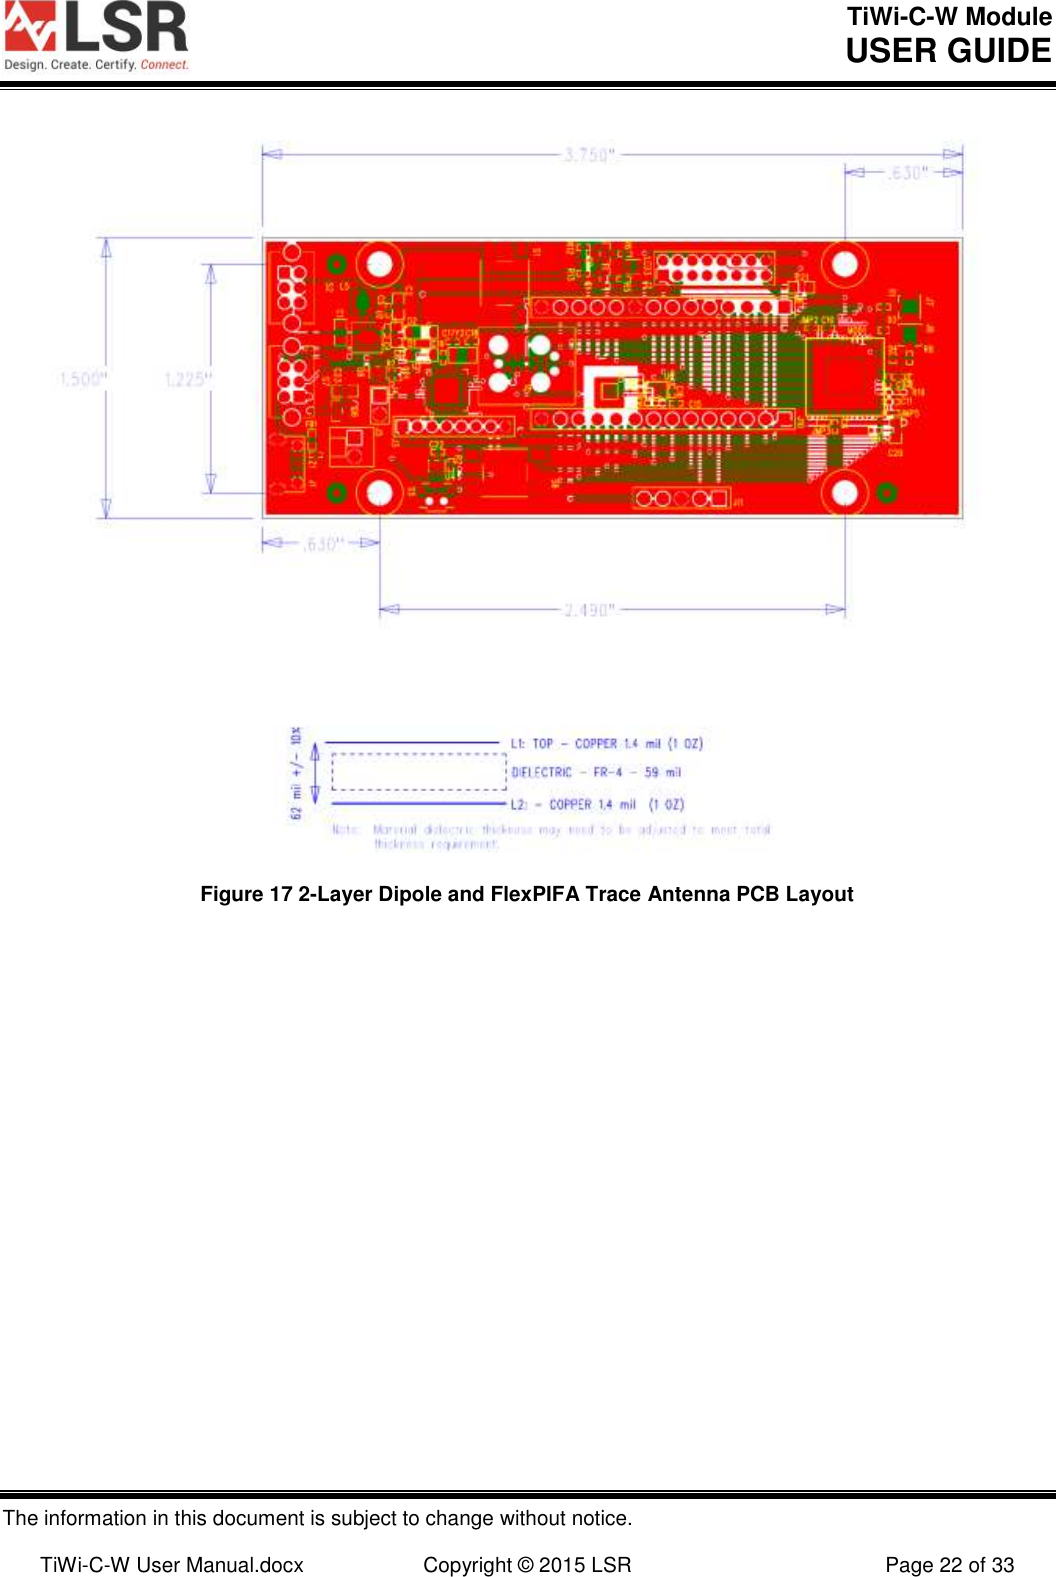 TiWi-C-W Module       USER GUIDE  The information in this document is subject to change without notice.  TiWi-C-W User Manual.docx  Copyright © 2015 LSR  Page 22 of 33   Figure 17 2-Layer Dipole and FlexPIFA Trace Antenna PCB Layout